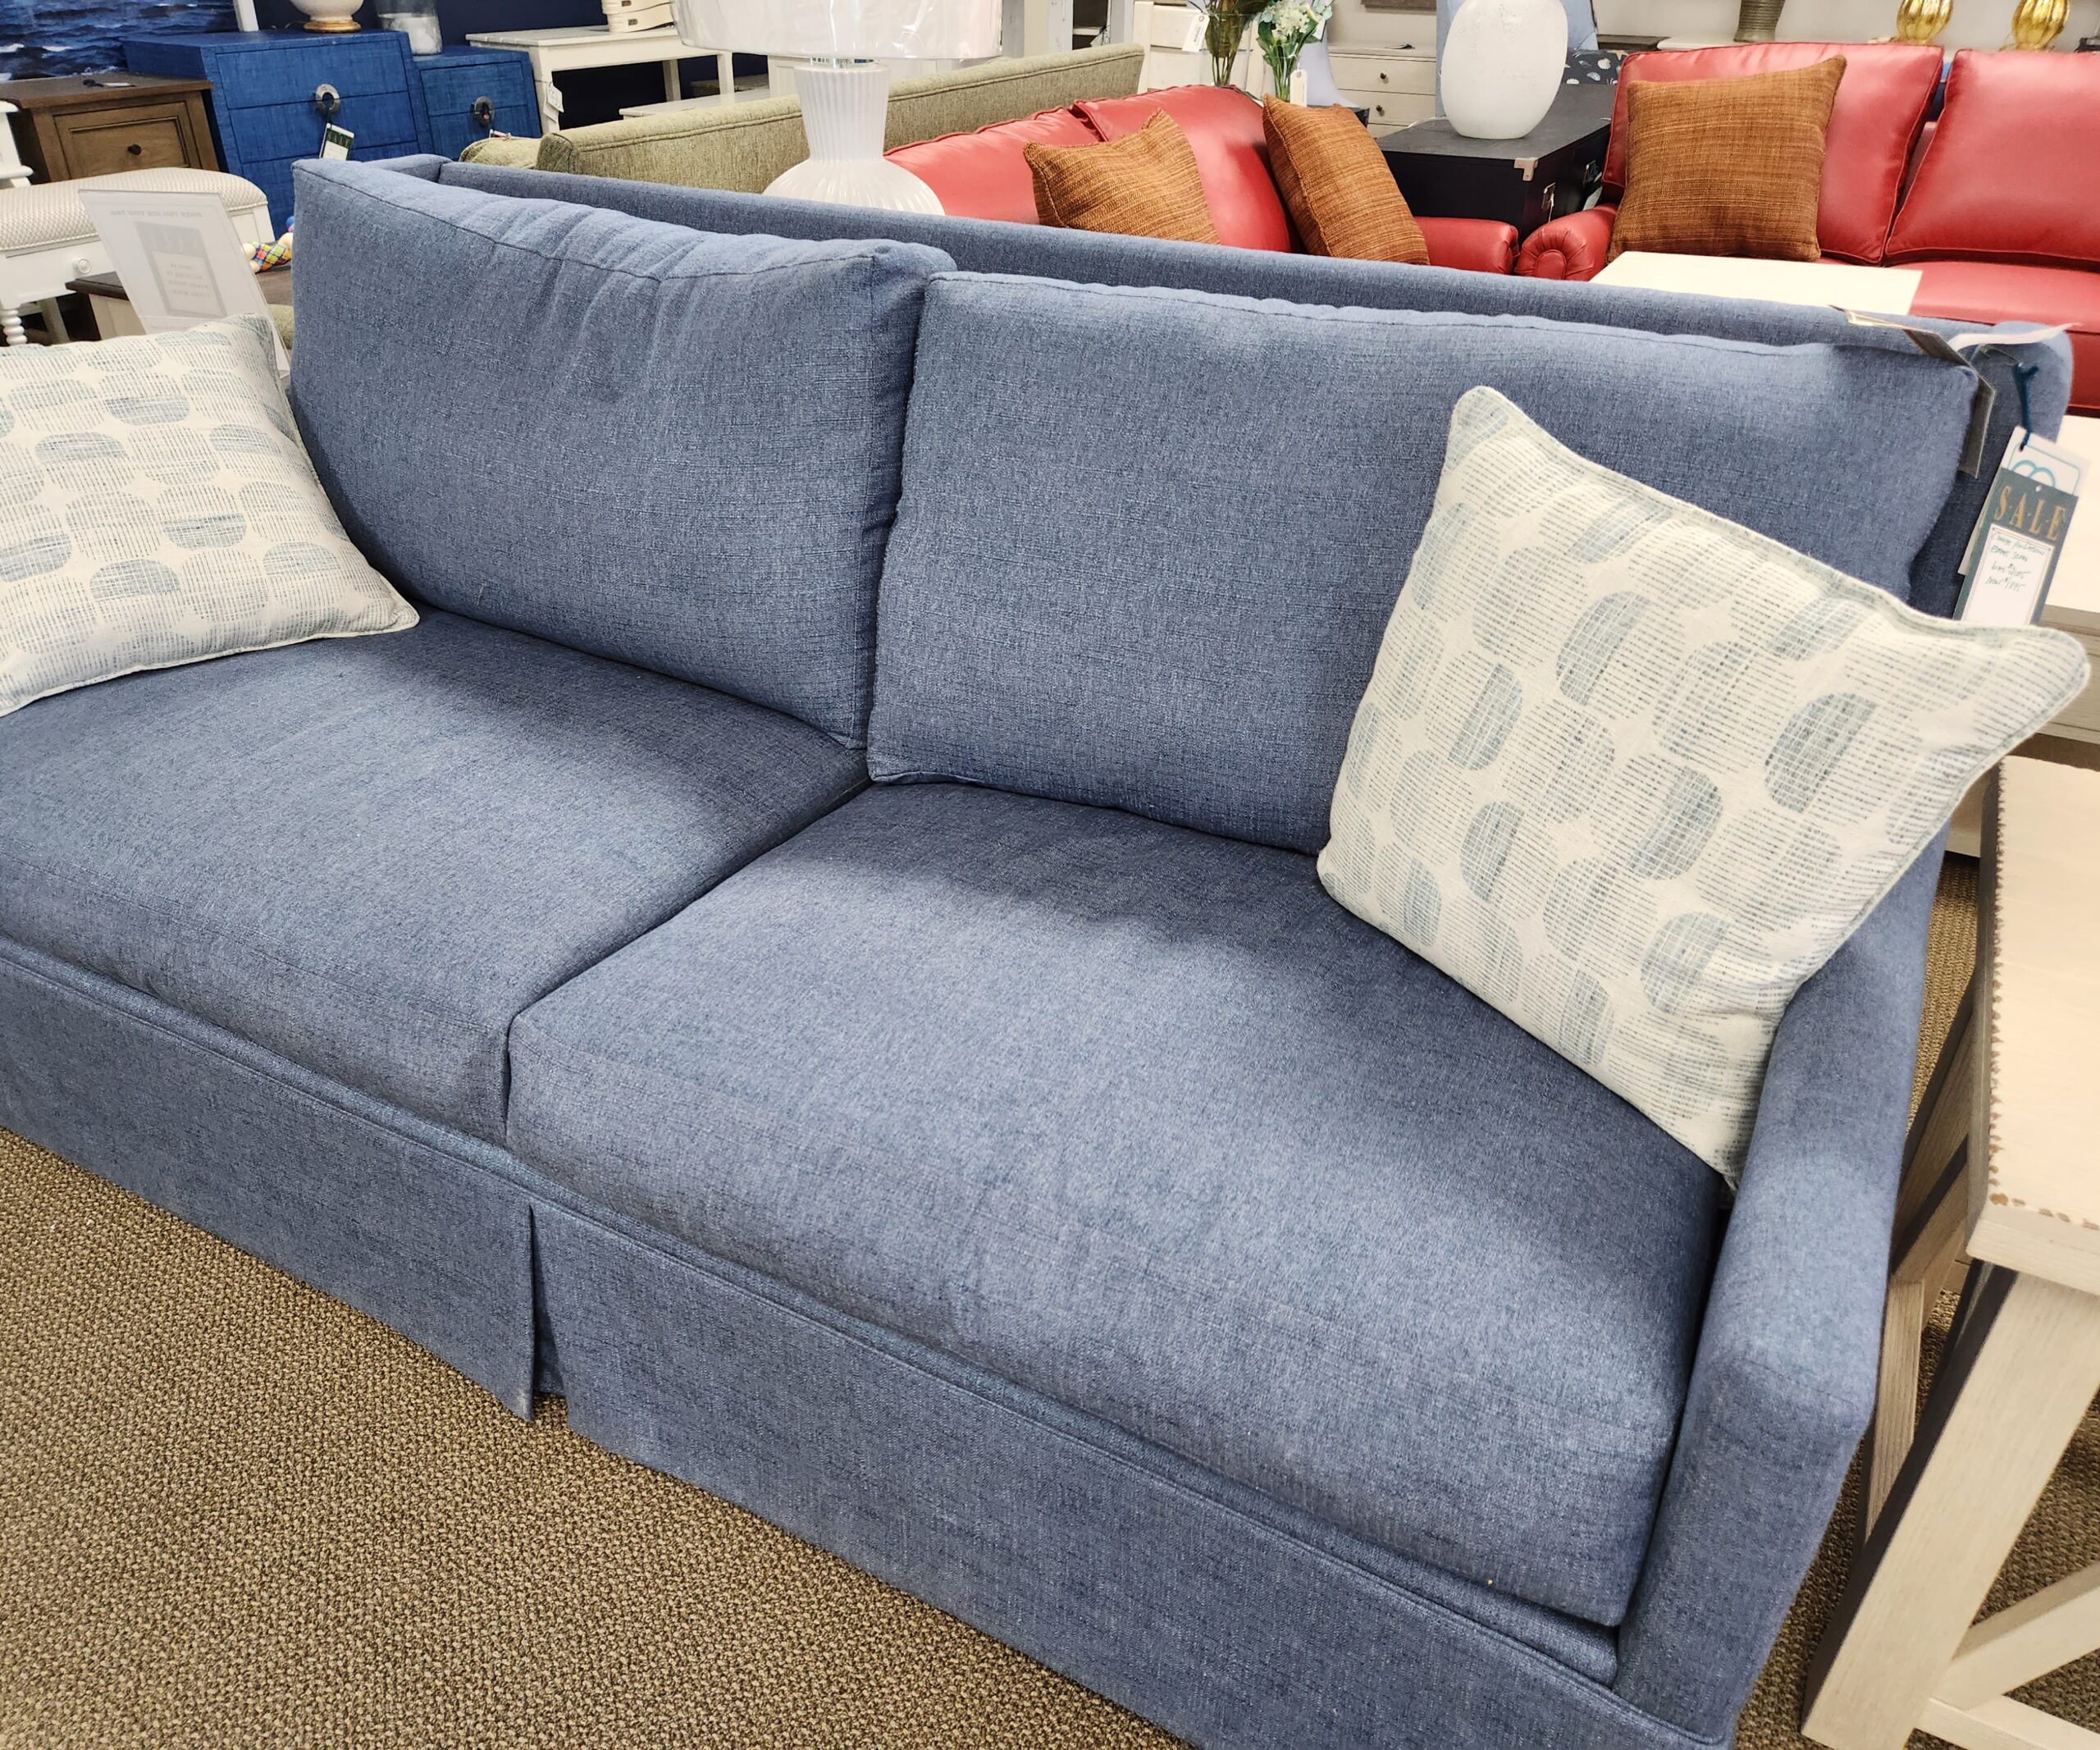 a blue couch with pillows on it in a store